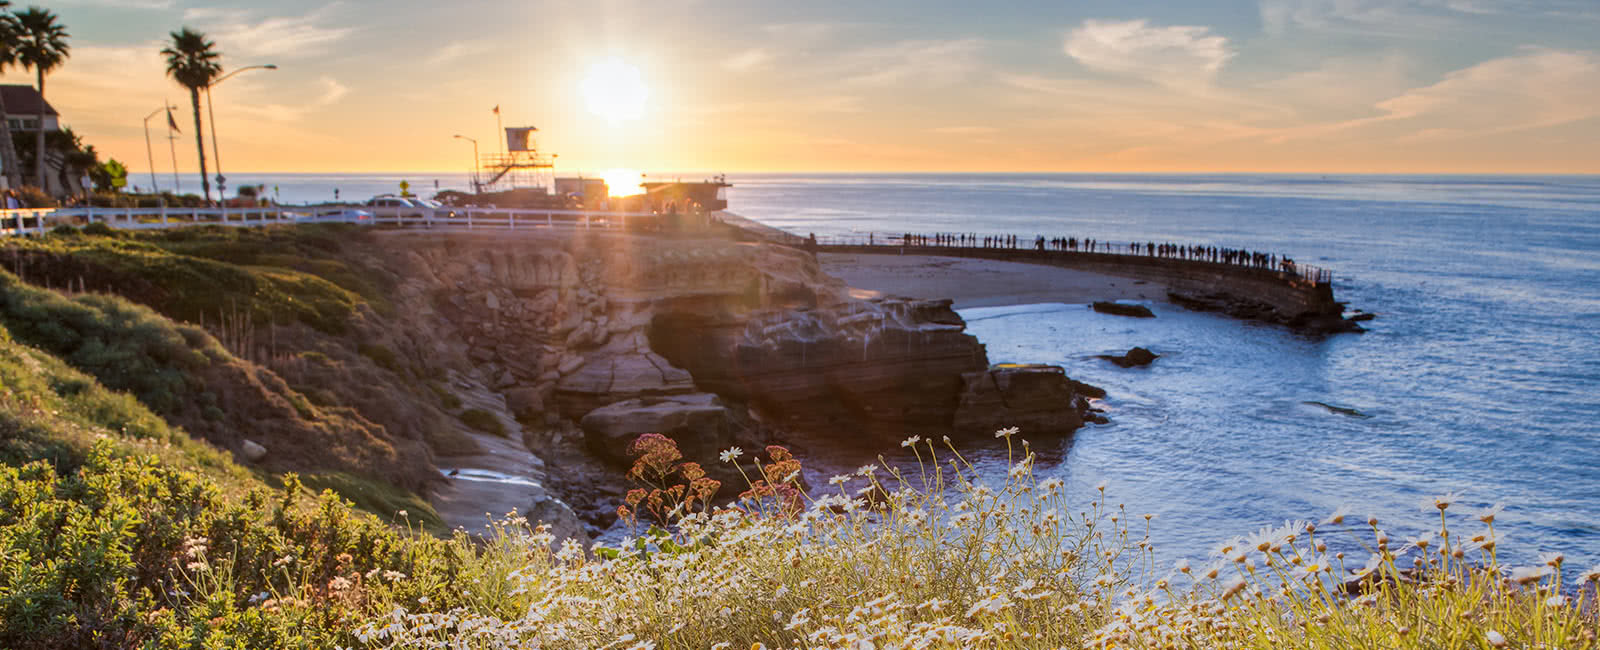 Enjoy a beach vacation in California with Hilton Grand Vacations